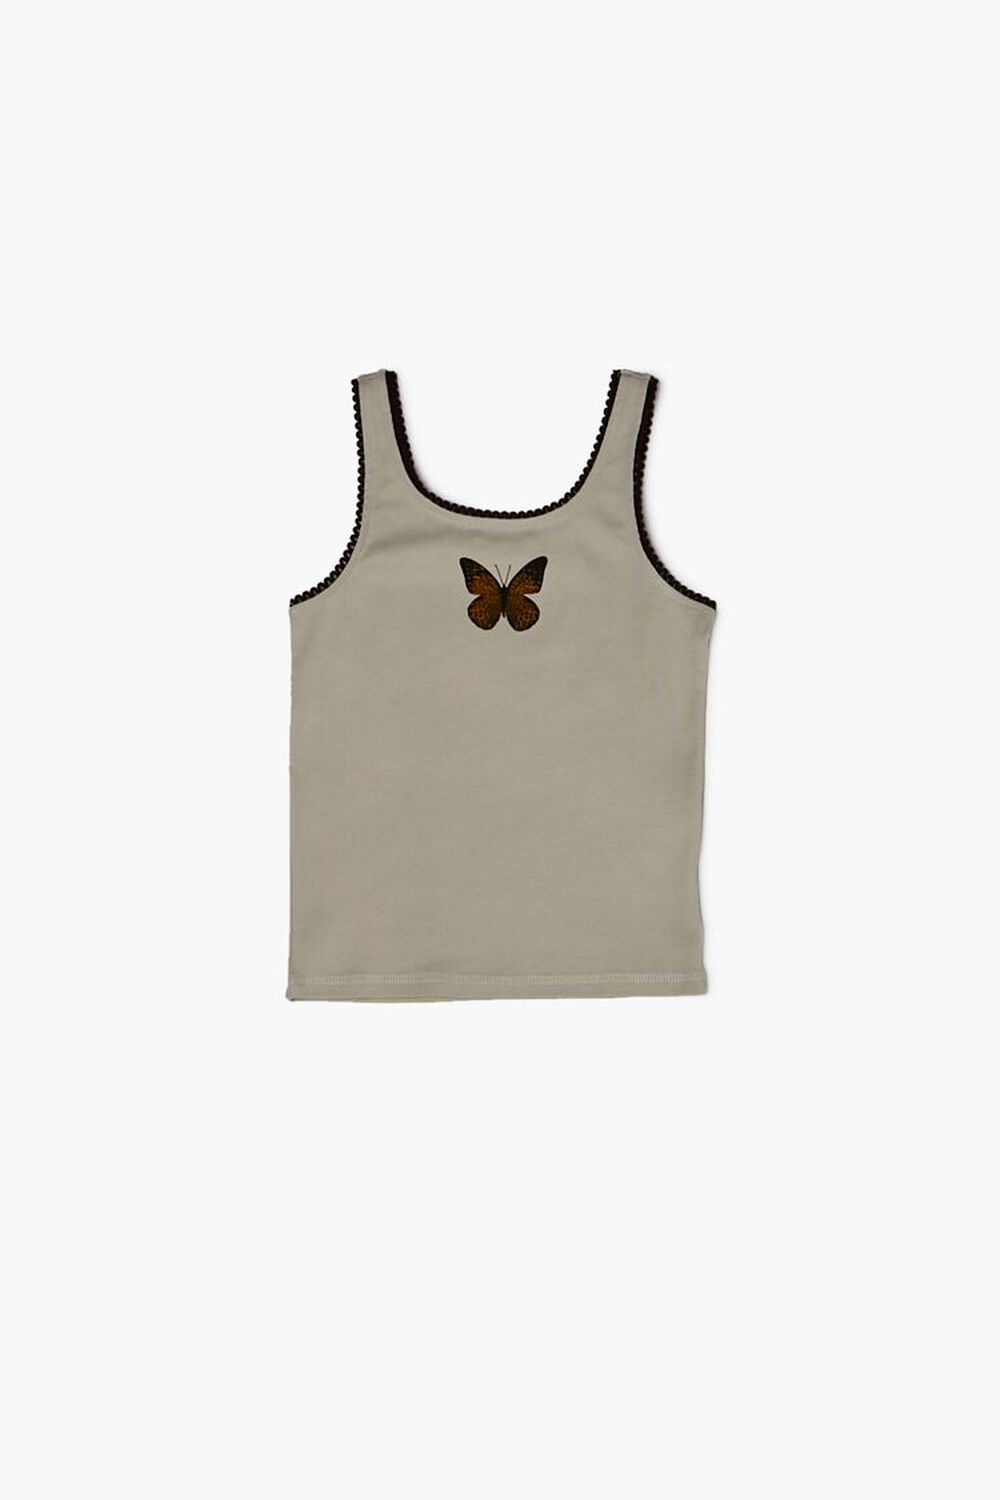 TAUPE/MULTI Girls Butterfly Graphic Tank Top (Kids), image 1